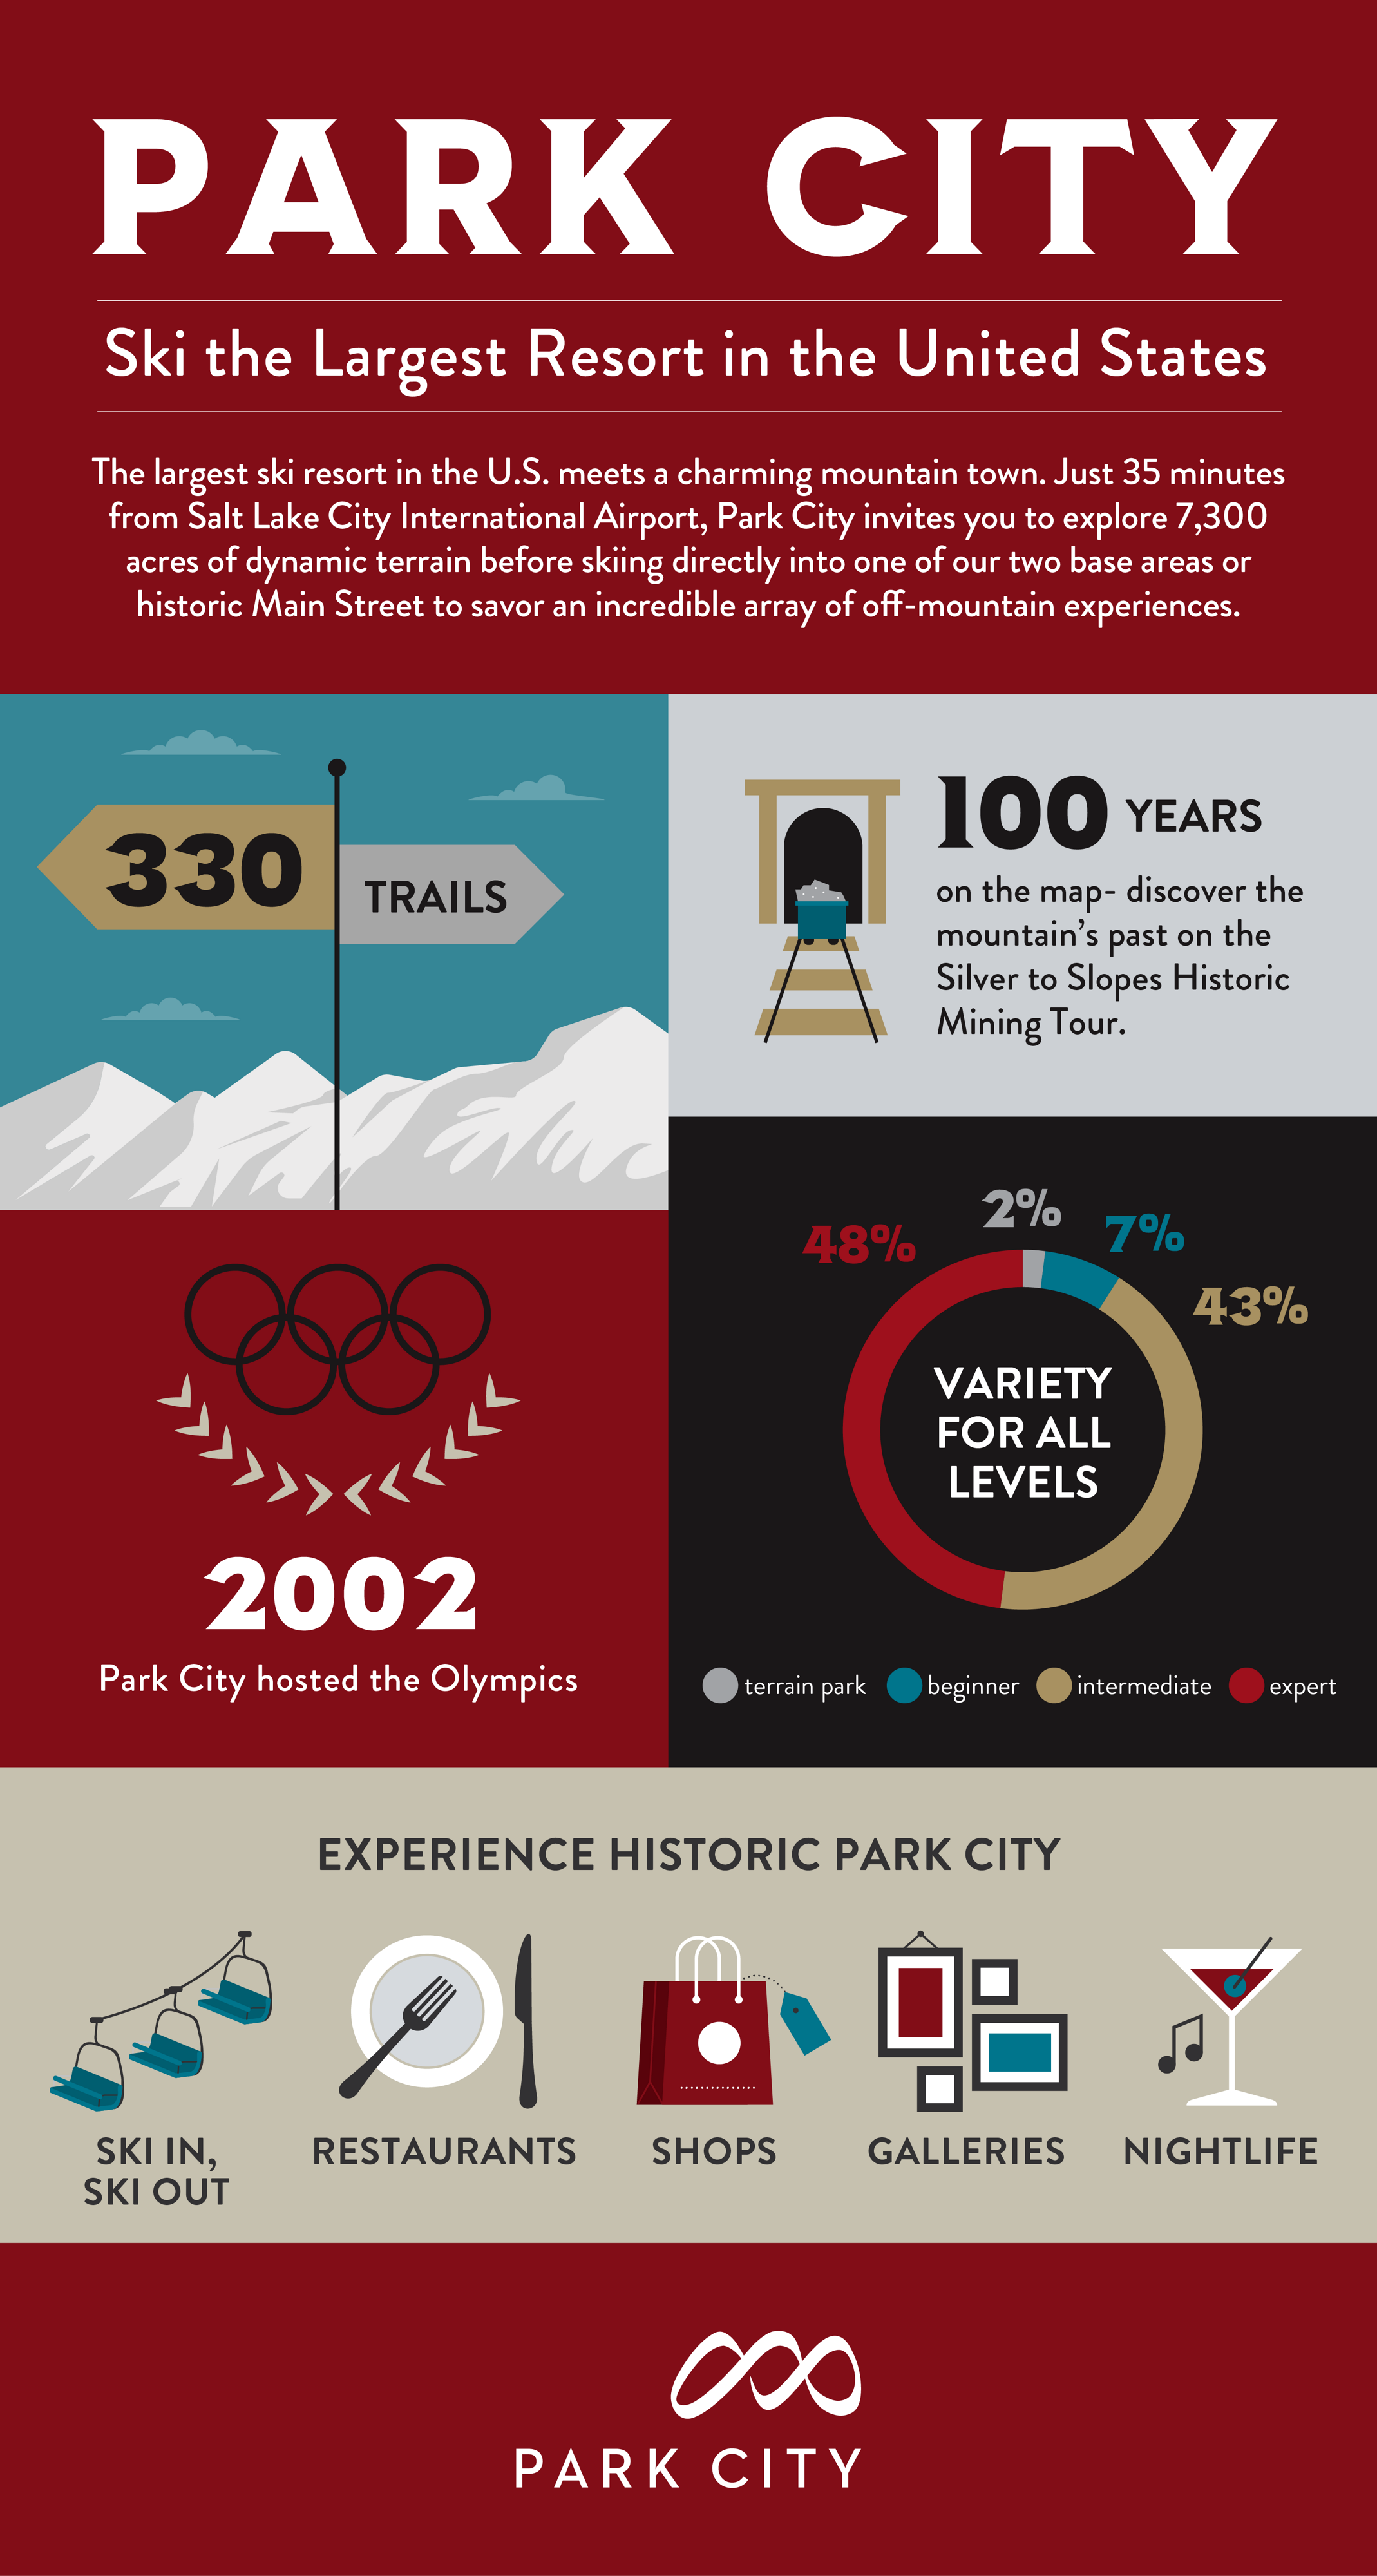 An infographic about Park City Ski resort featuring facts about the 330 trails, base areas, and 7300+ skiable acres.